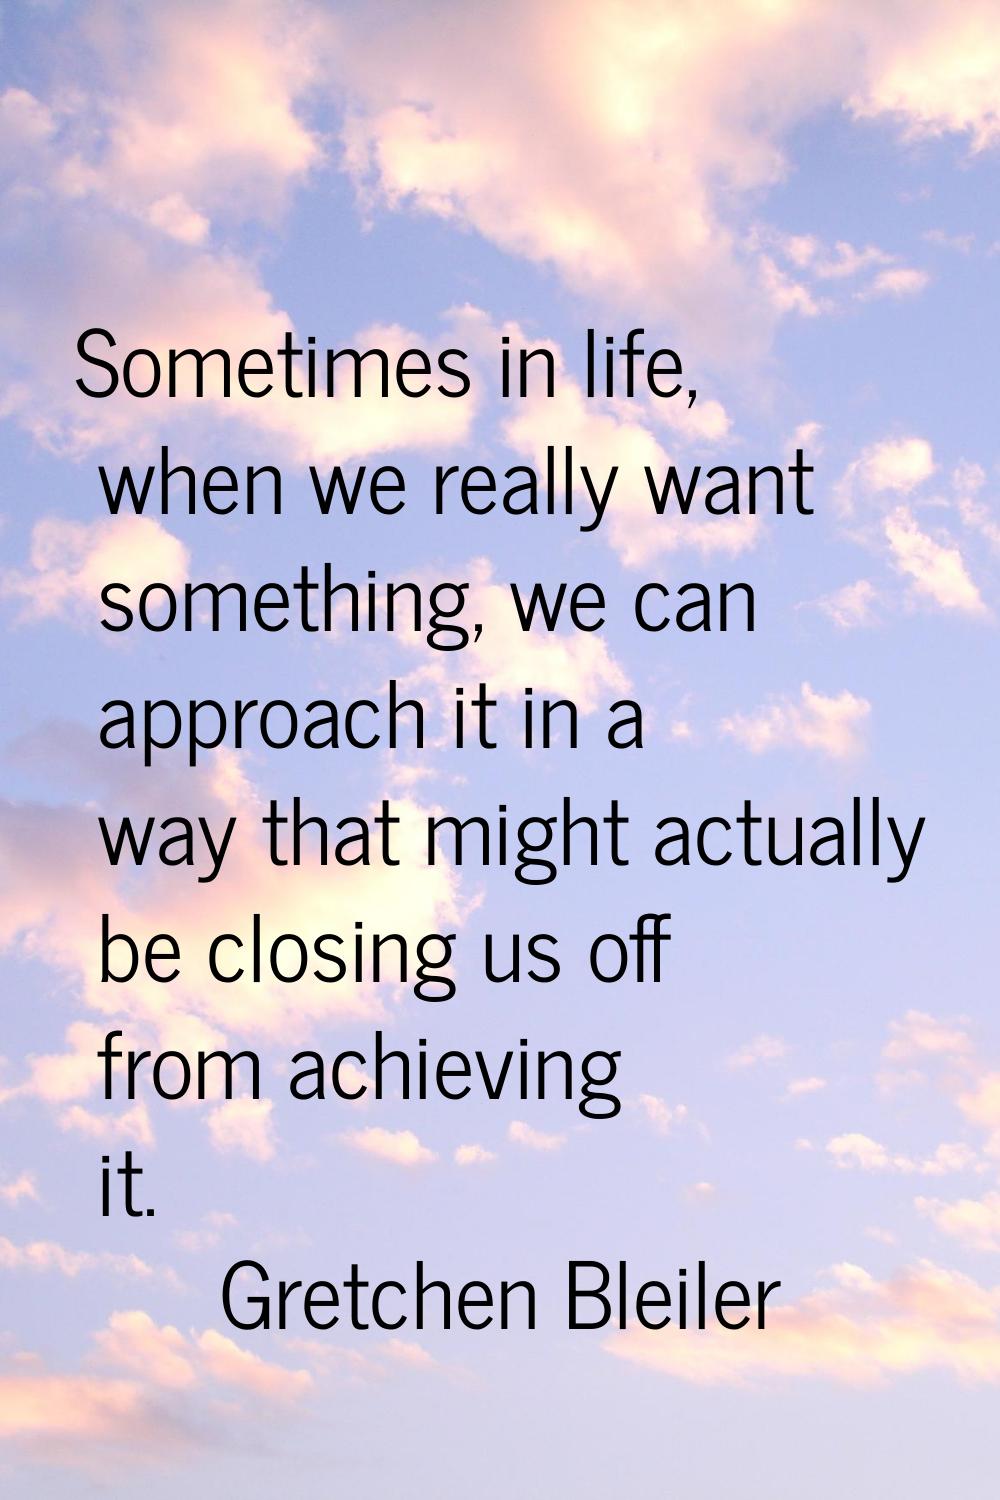 Sometimes in life, when we really want something, we can approach it in a way that might actually b